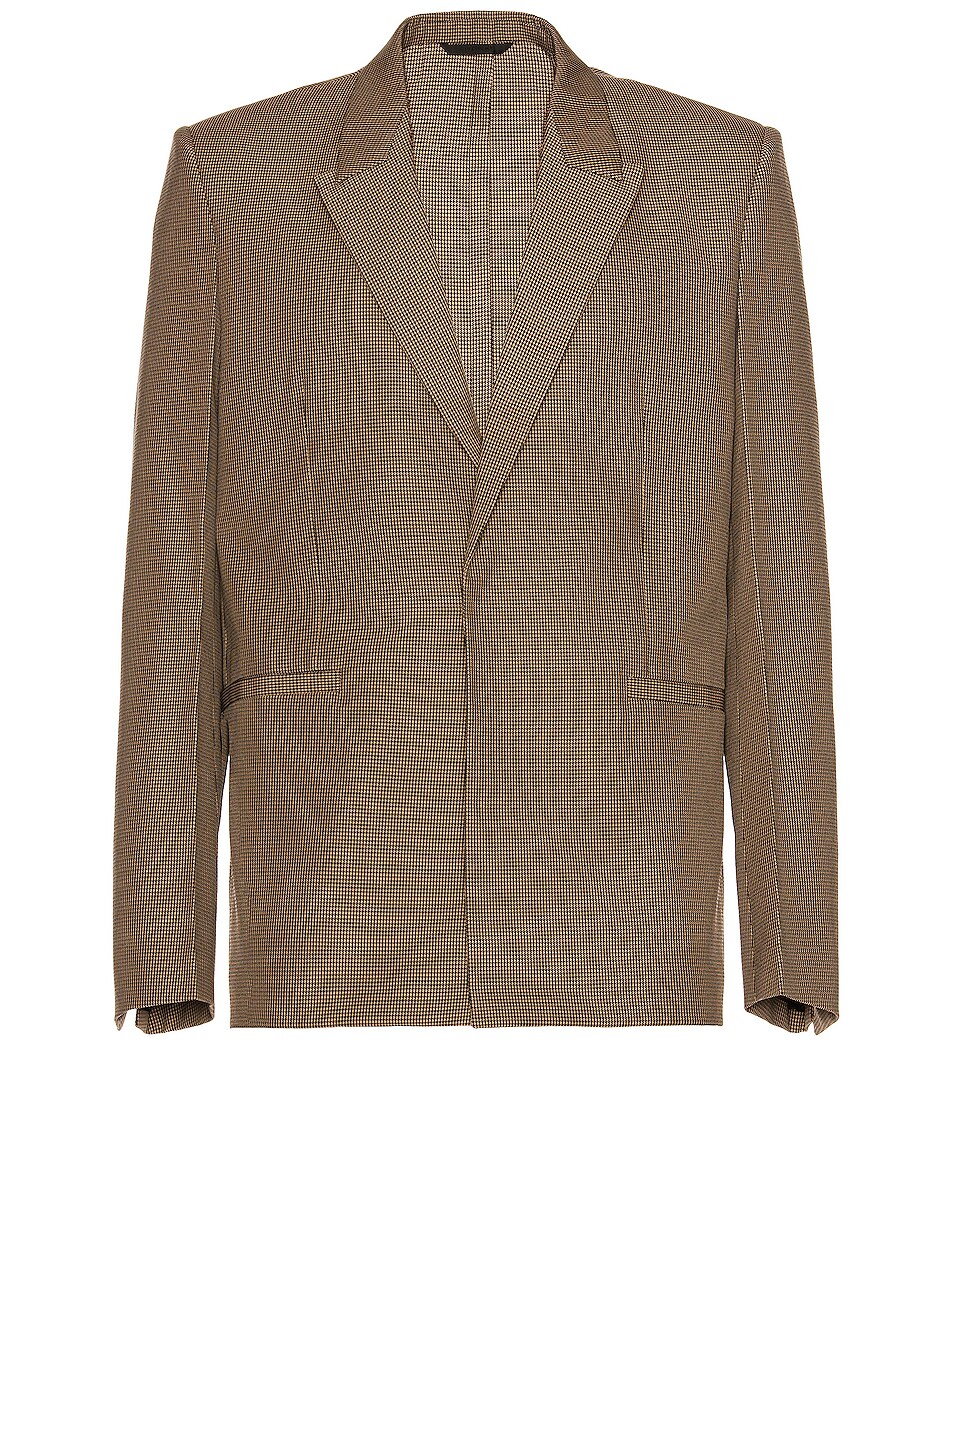 Image 1 of Givenchy Boxy Fit Light Jacket in Light Brown & Brown